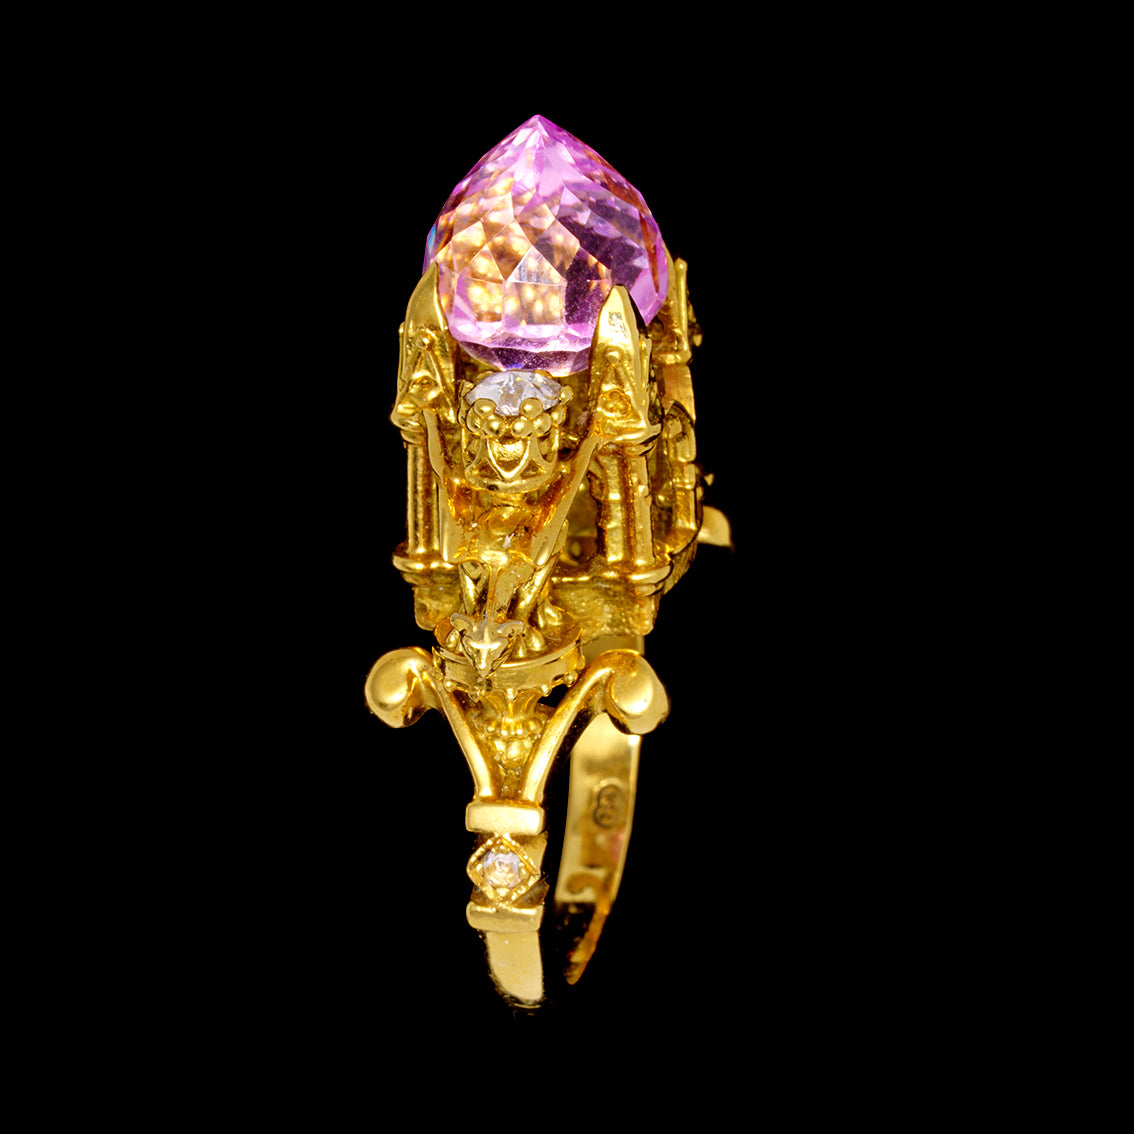 HIGHER DIVINITY RING